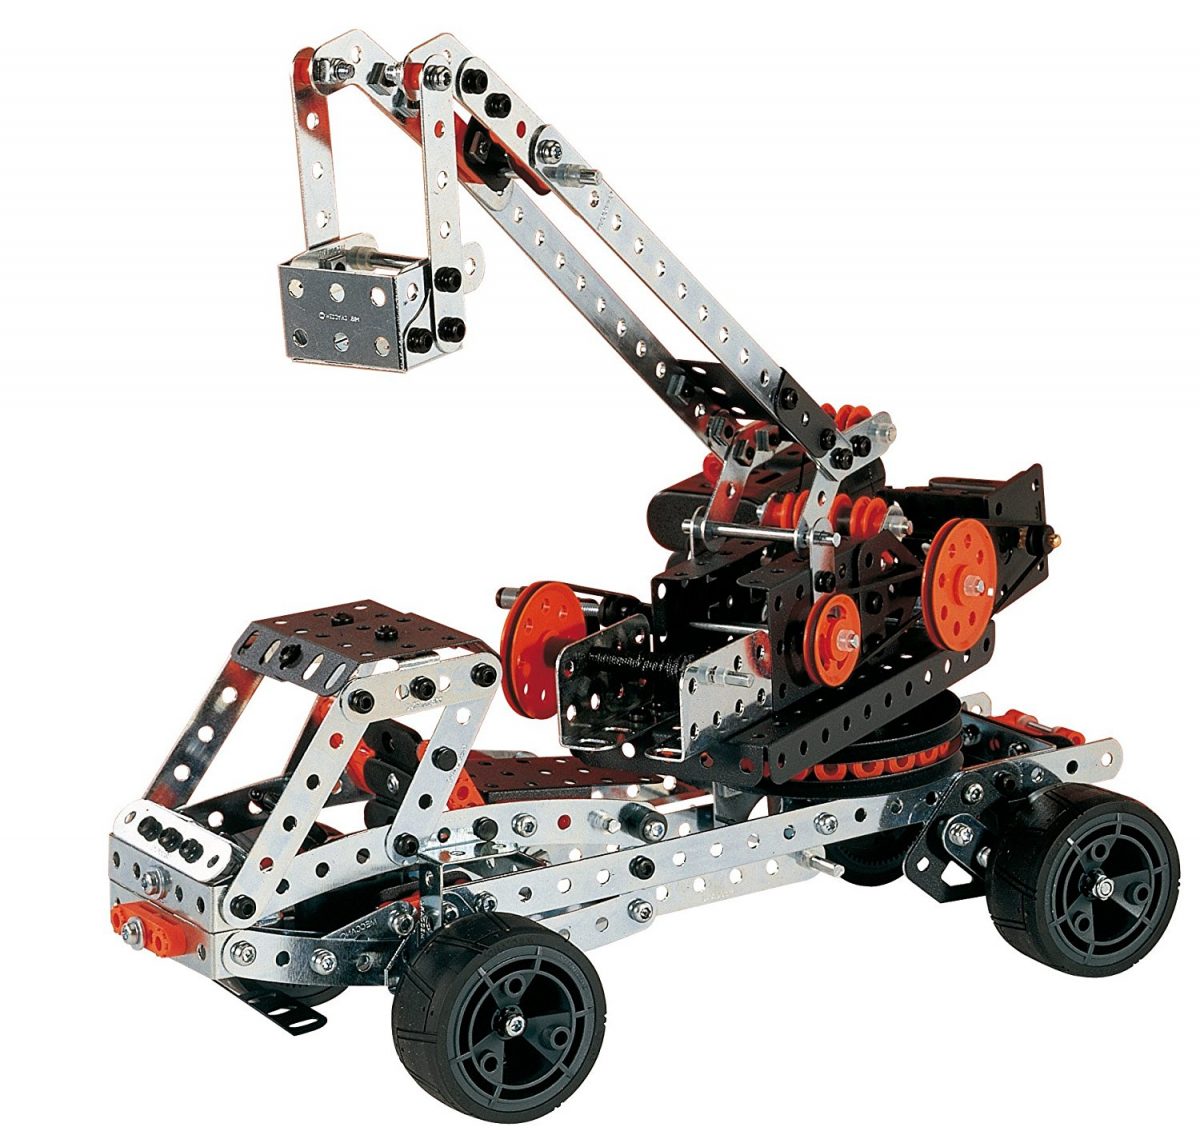 The Erector Set: Adapting to Others